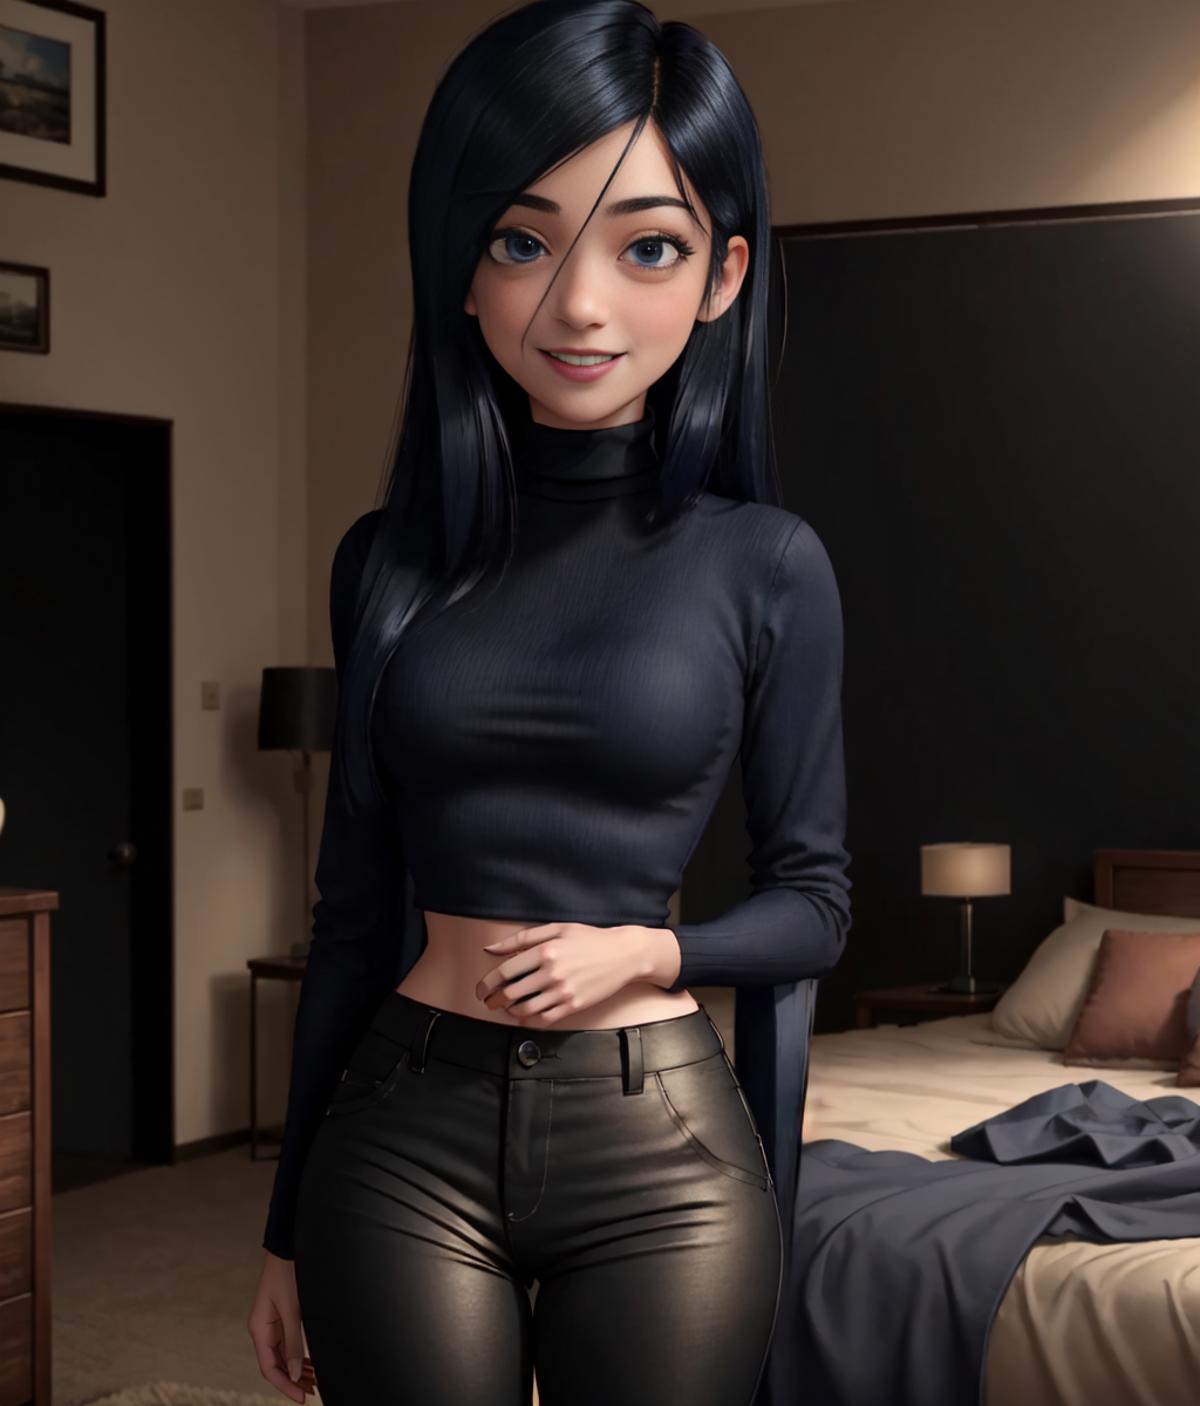 Violet Parr (The Incredibles) image by cultureddegenerate66276